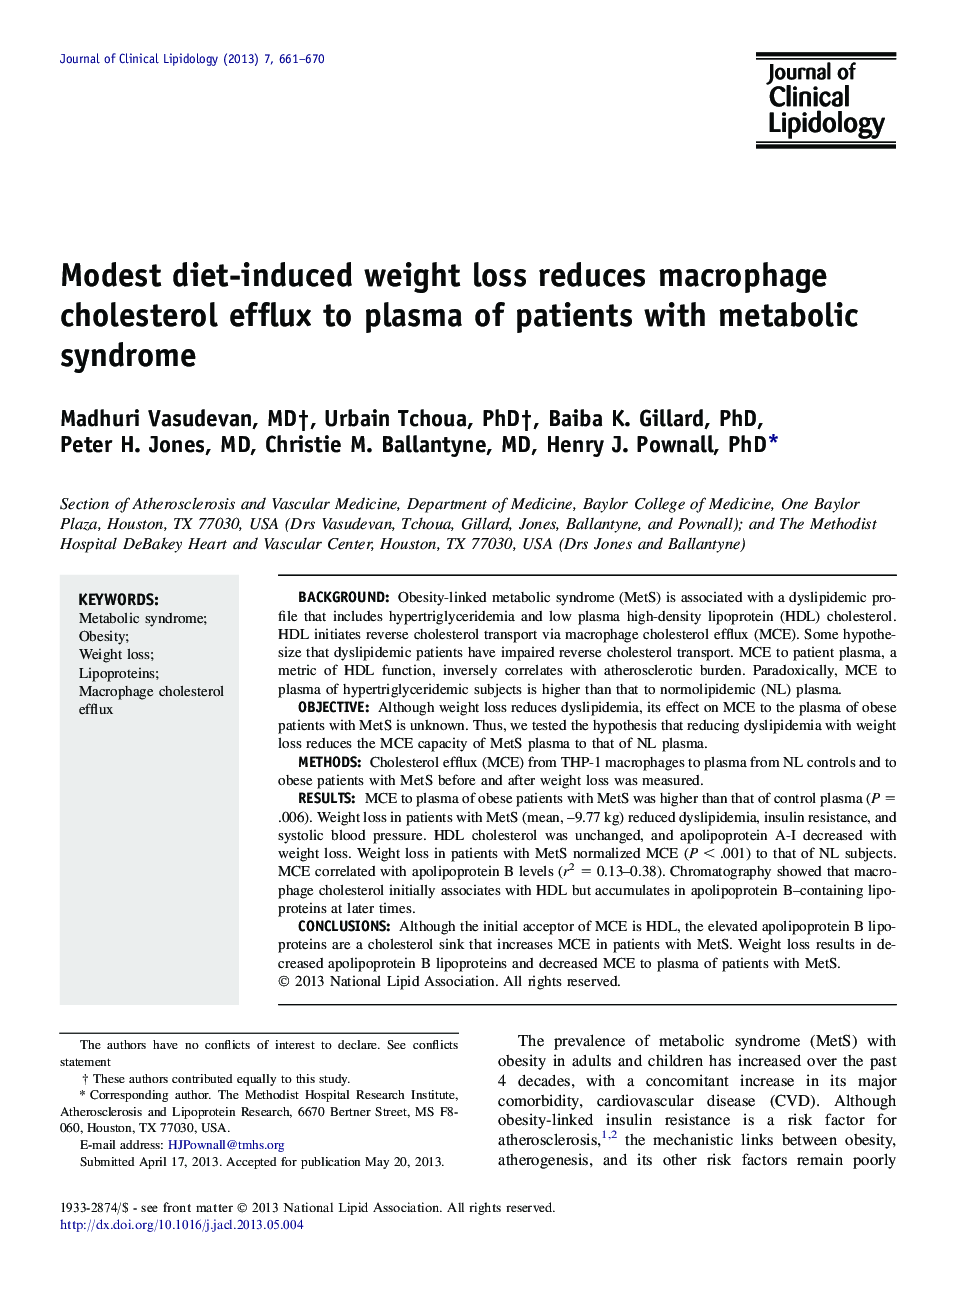 Modest diet-induced weight loss reduces macrophage cholesterol efflux to plasma of patients with metabolic syndrome 